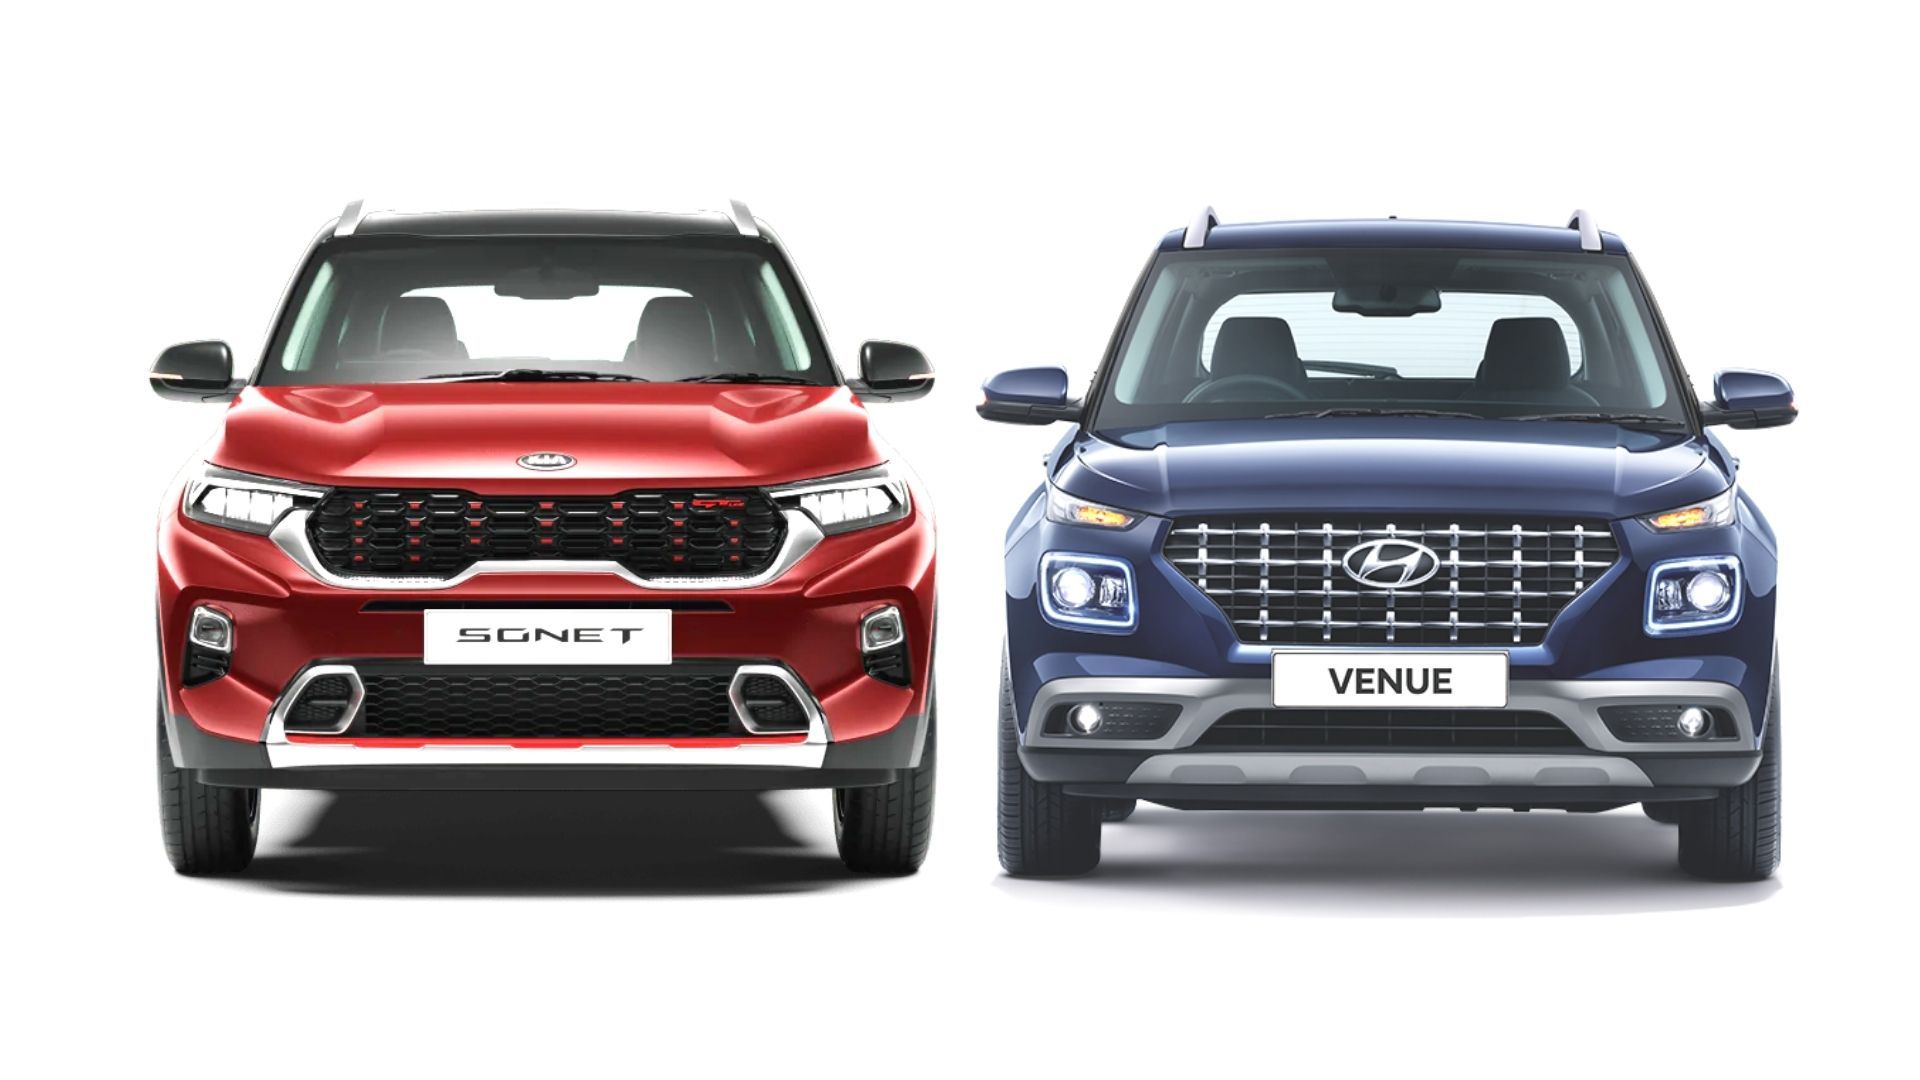 Features That Kia Sonet Will Get Over The Hyundai Venue